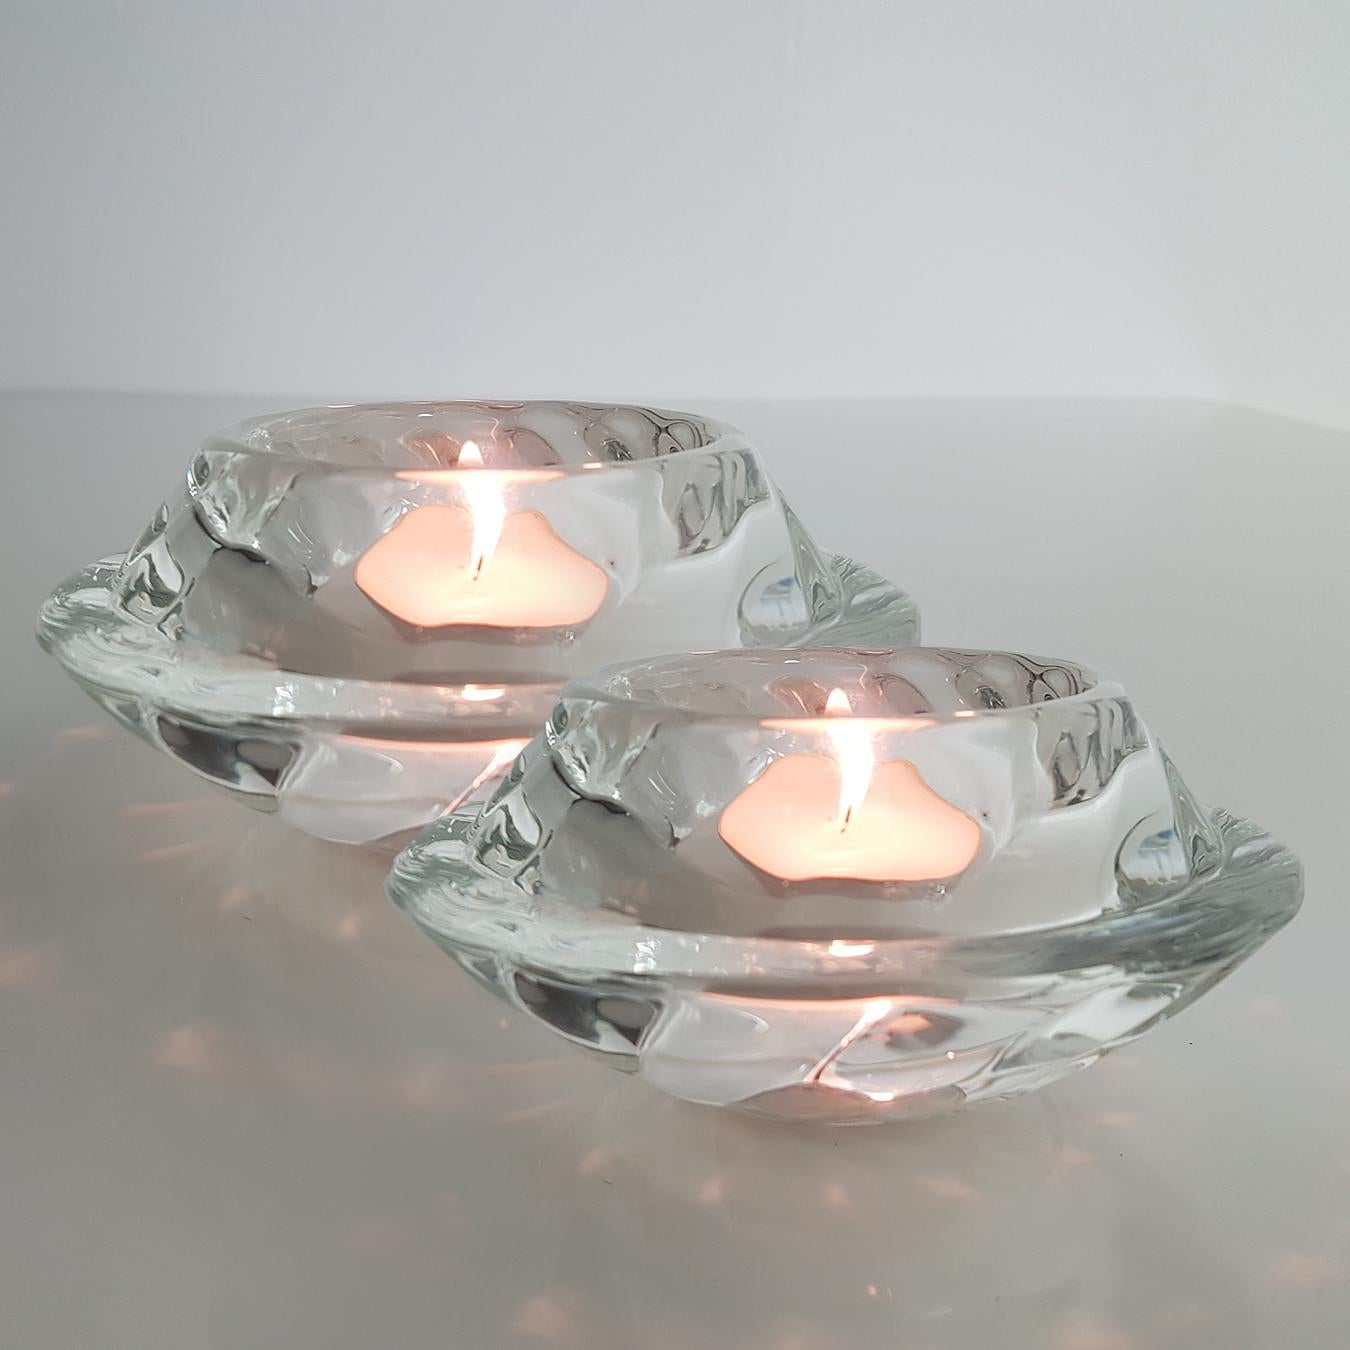 This pair of votive candle holders designed by Royal Copenhagen are heavy, substantial and gorgeous. Inspired by nature. Also gorgeous on a holiday table! The Capriole pattern is a gift and hollow ware pattern that features bowls and votive